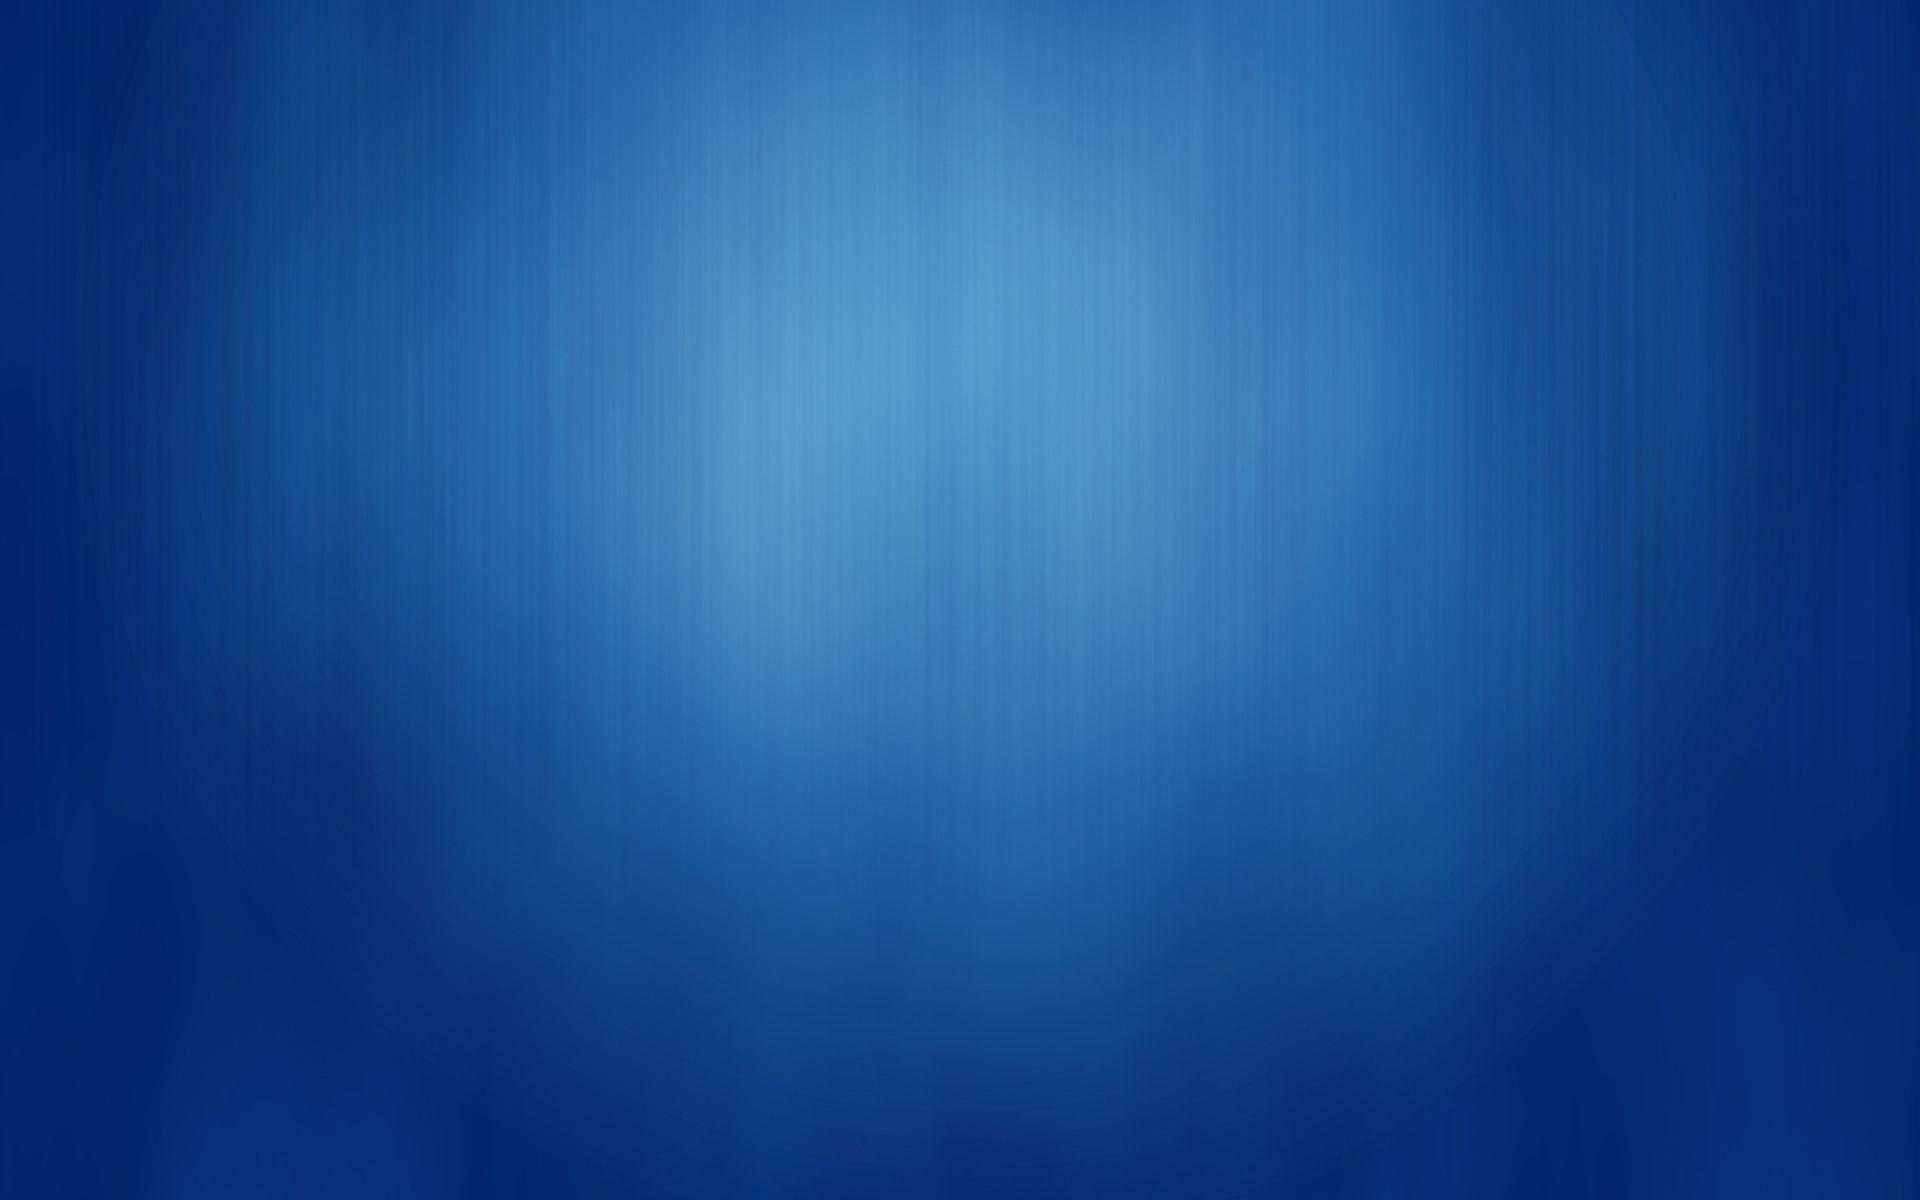 Blue Abstract Background 2042 Hd Wallpapers in Abstract - Imagesci.com | Blue  background wallpapers, Blue background images, Black and blue wallpaper